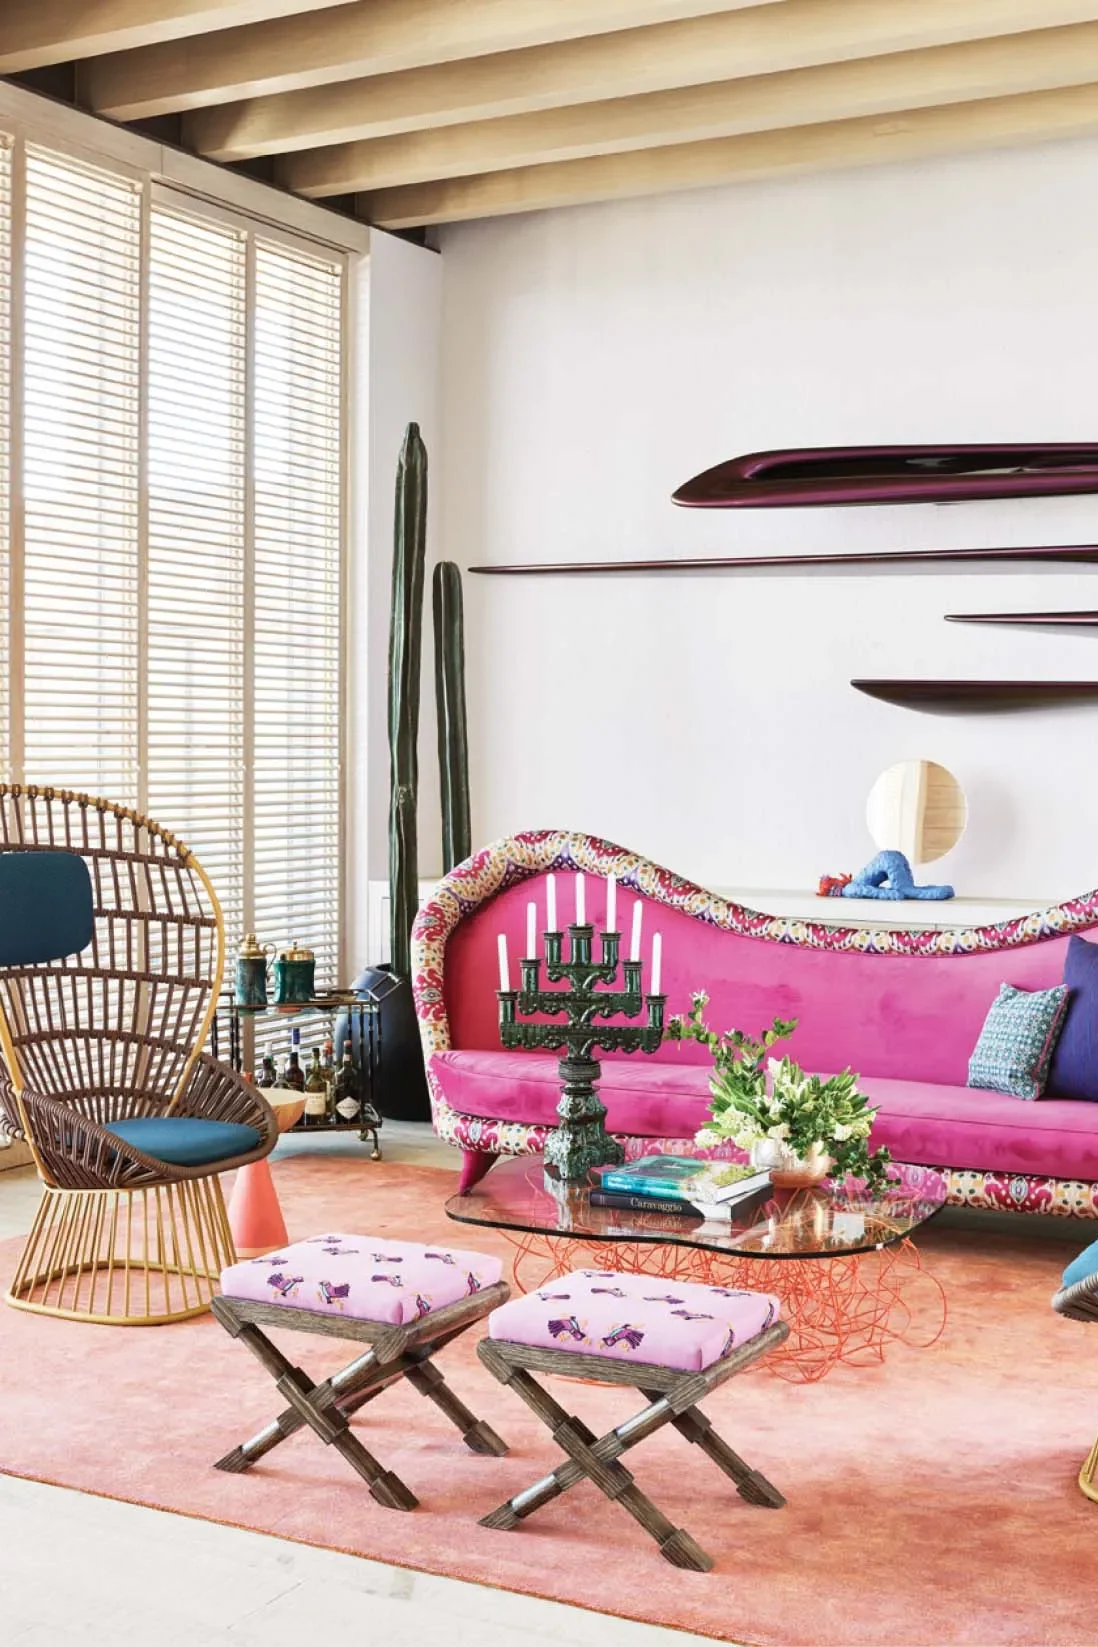 Living room with an eclectic mix of relaxed and colorful furniture